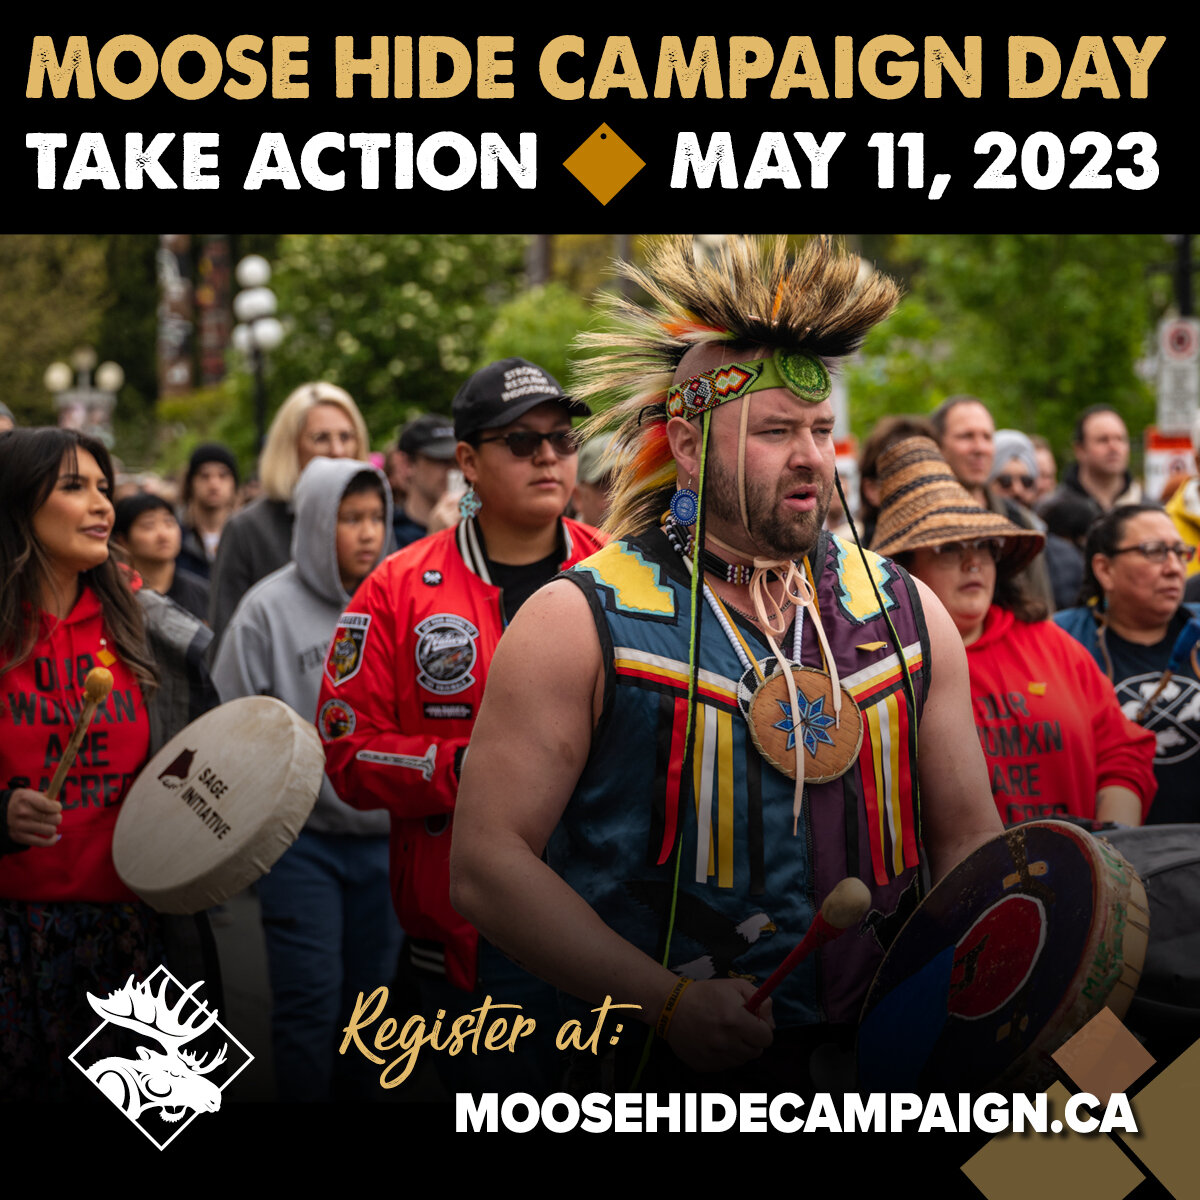 #TY for your support of the 2023 #MooseHideCampaignDay, an #Indigenous-led movement of men, boys &amp; all #Canadians committed to honouring, respecting, and protecting women and children. Wearing the Moose Hide pin is a pledge to helping create envi